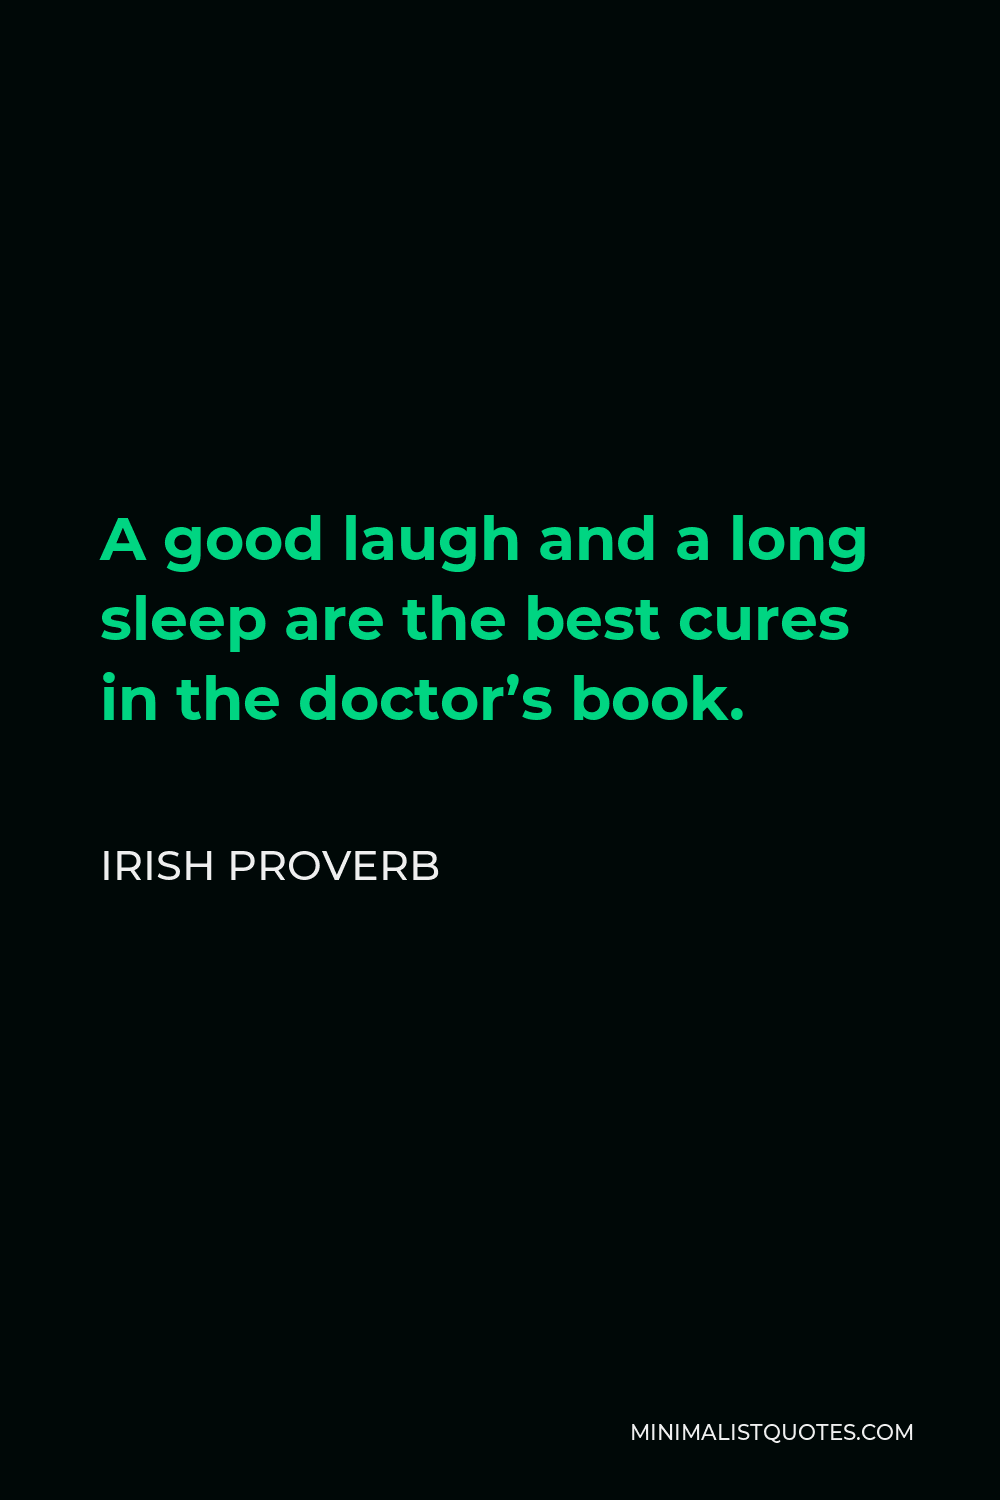 Irish Proverb Quote - A good laugh and a long sleep are the best cures in the doctor’s book.